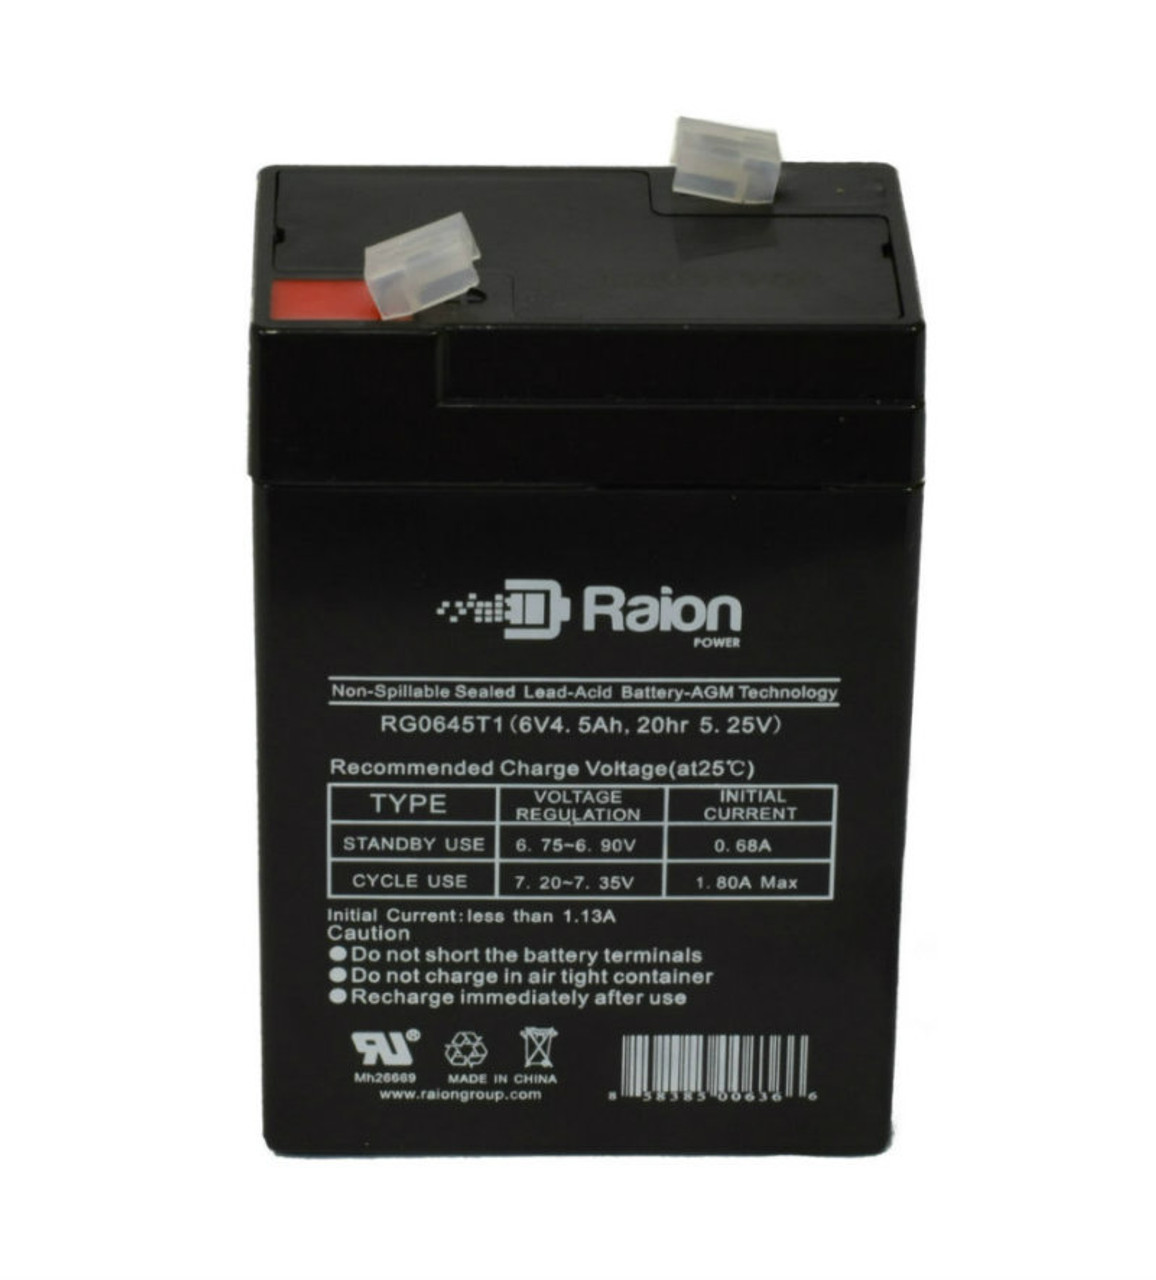 Raion Power RG0645T1 Replacement Battery Cartridge for Canbat CBL4-6